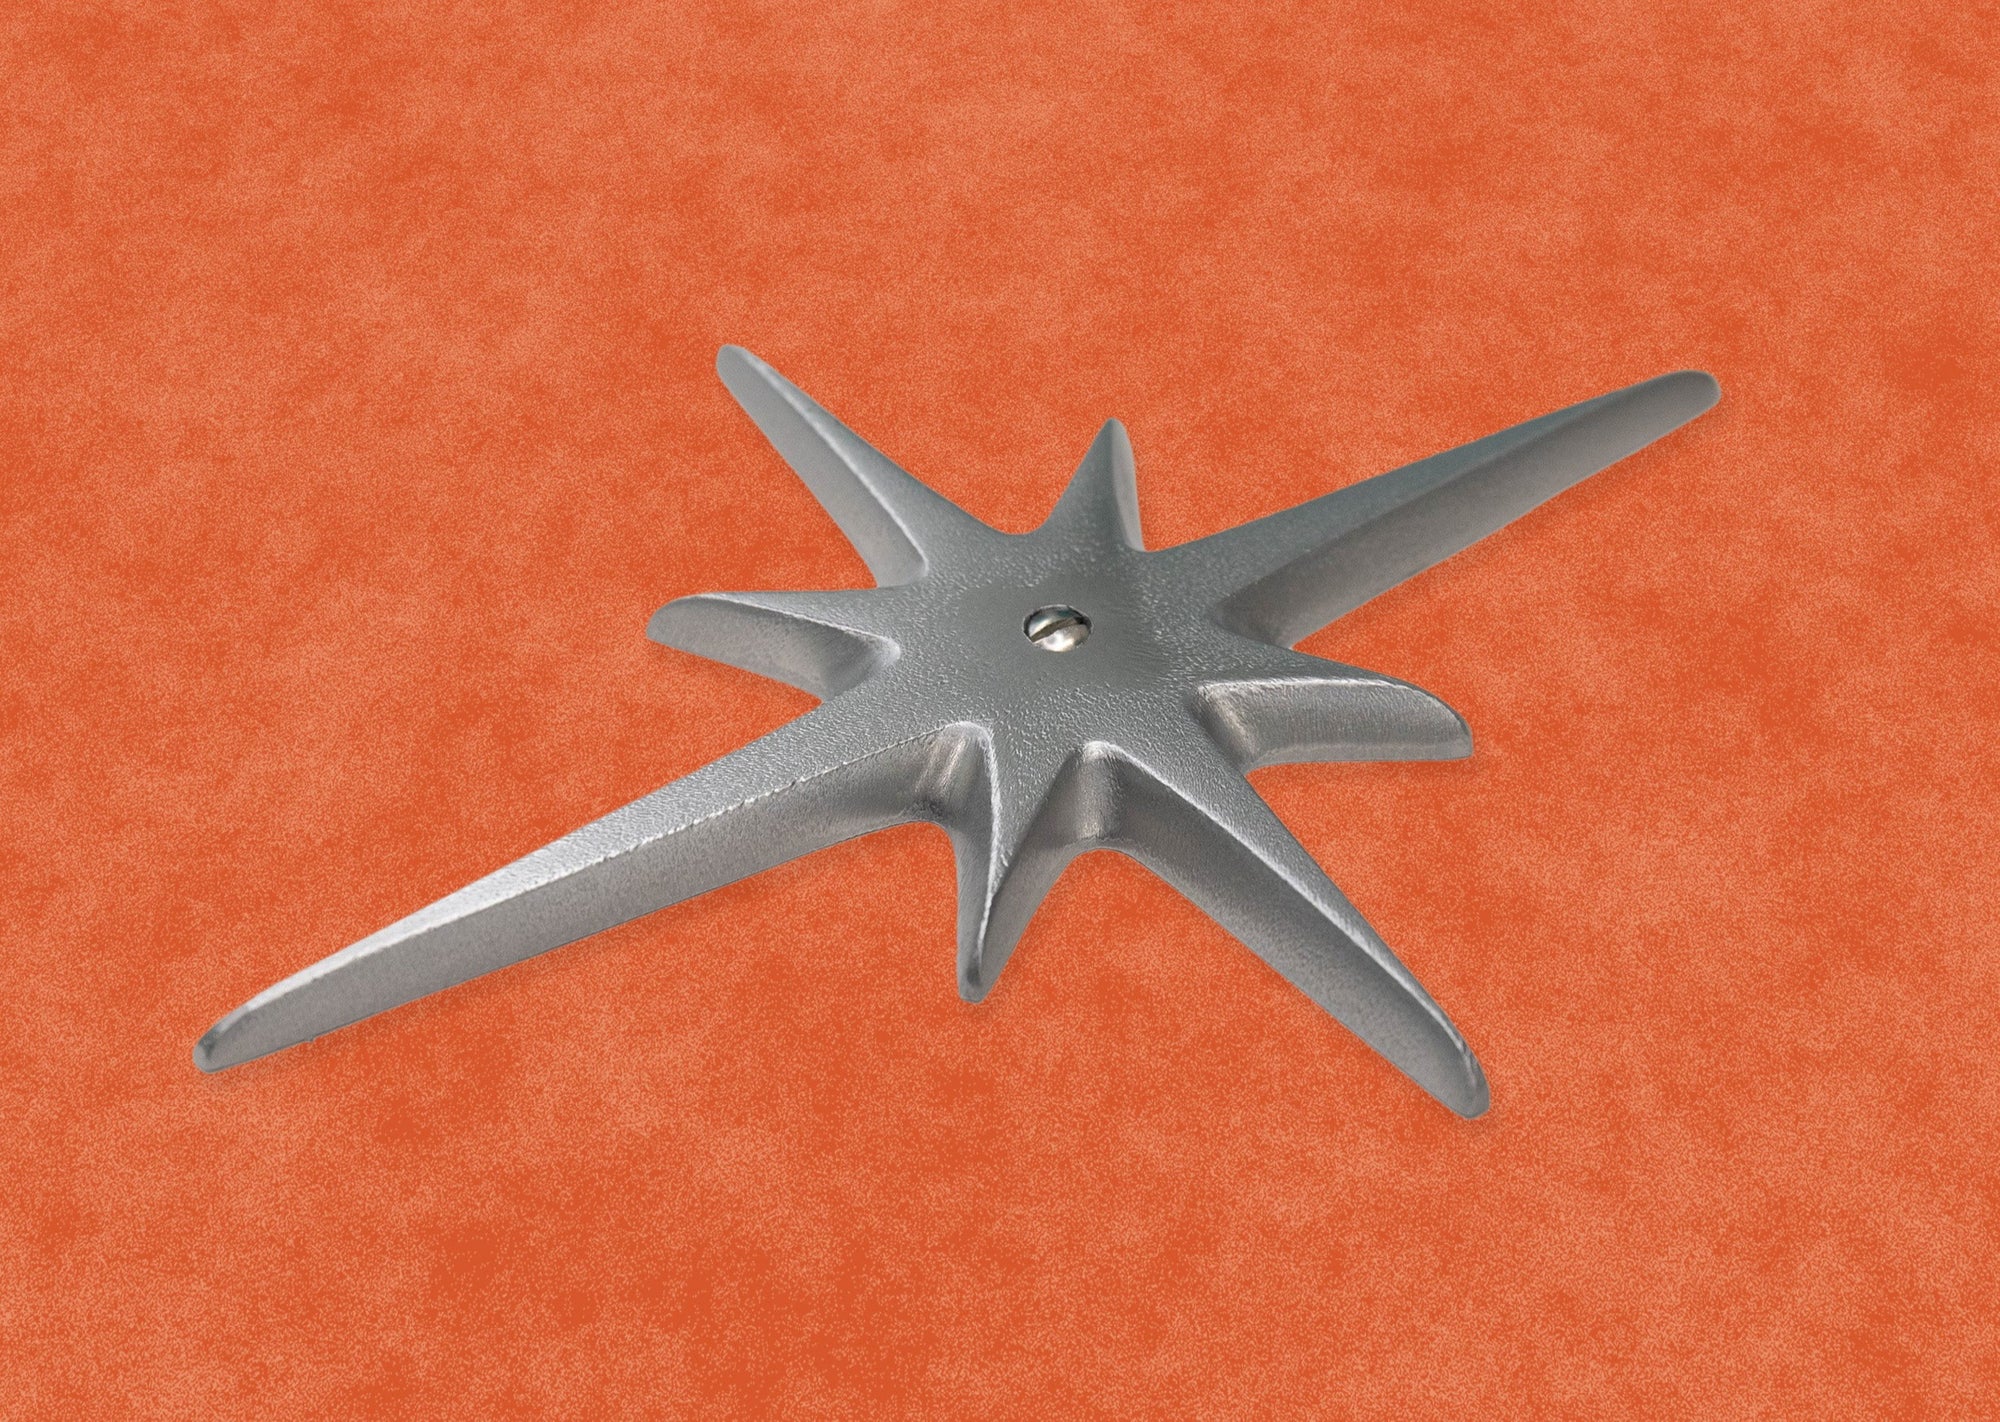 A closer view of the medium starburst with a single screw at its center. You can clearly see the slightly porous texture on the surface, but it still has a very nice smooth silver shine. The edges of the starburst points are nicely rounded off.